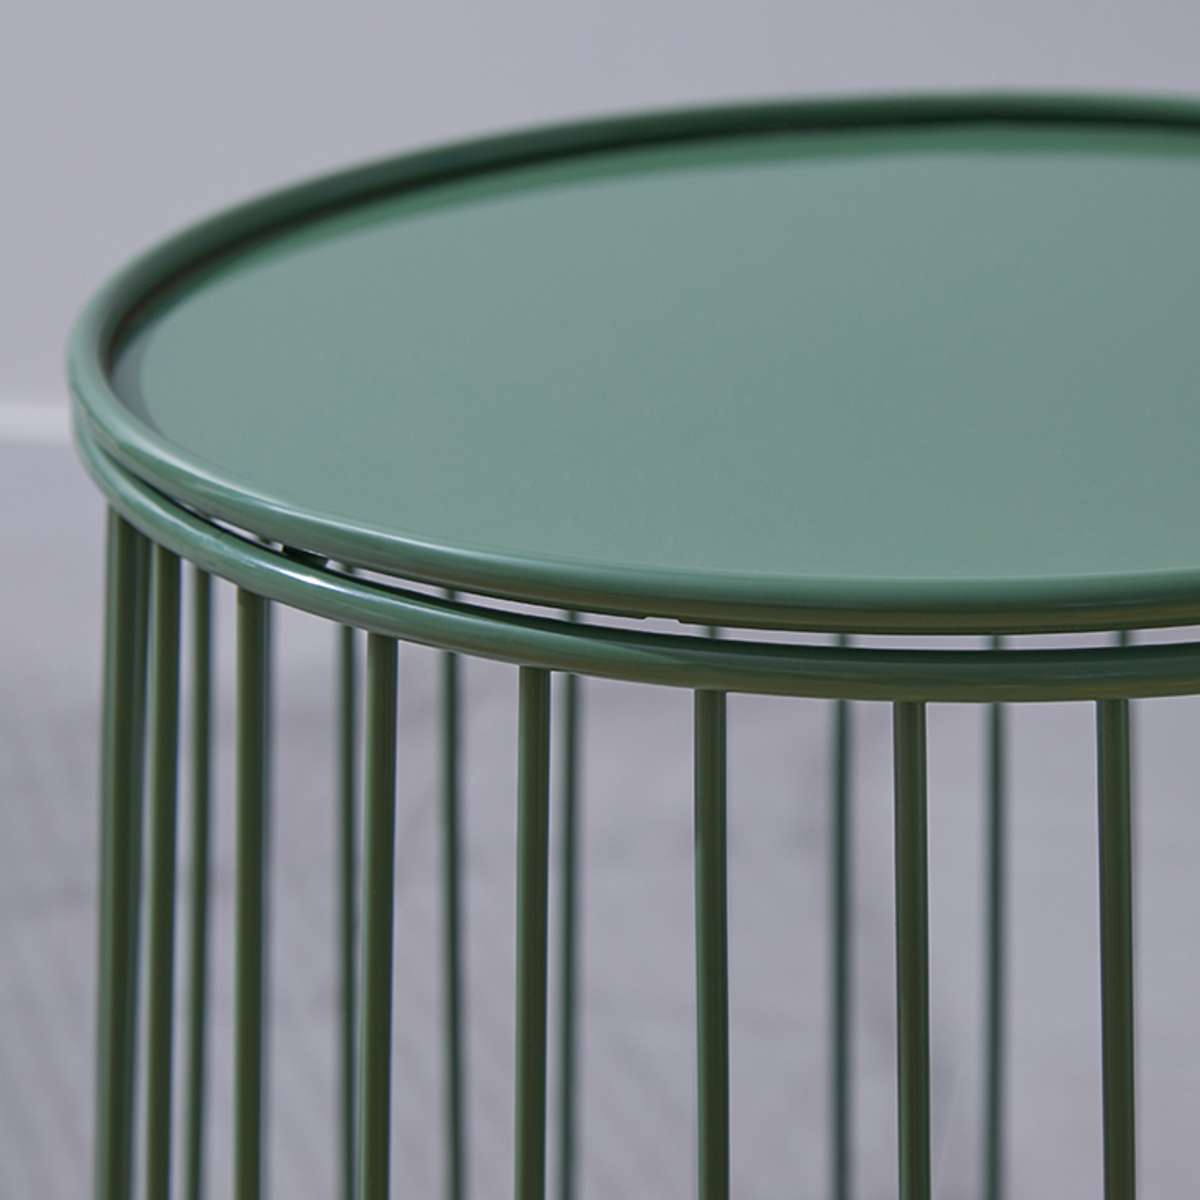 Hunter Outdoor Side Table - Forest Green